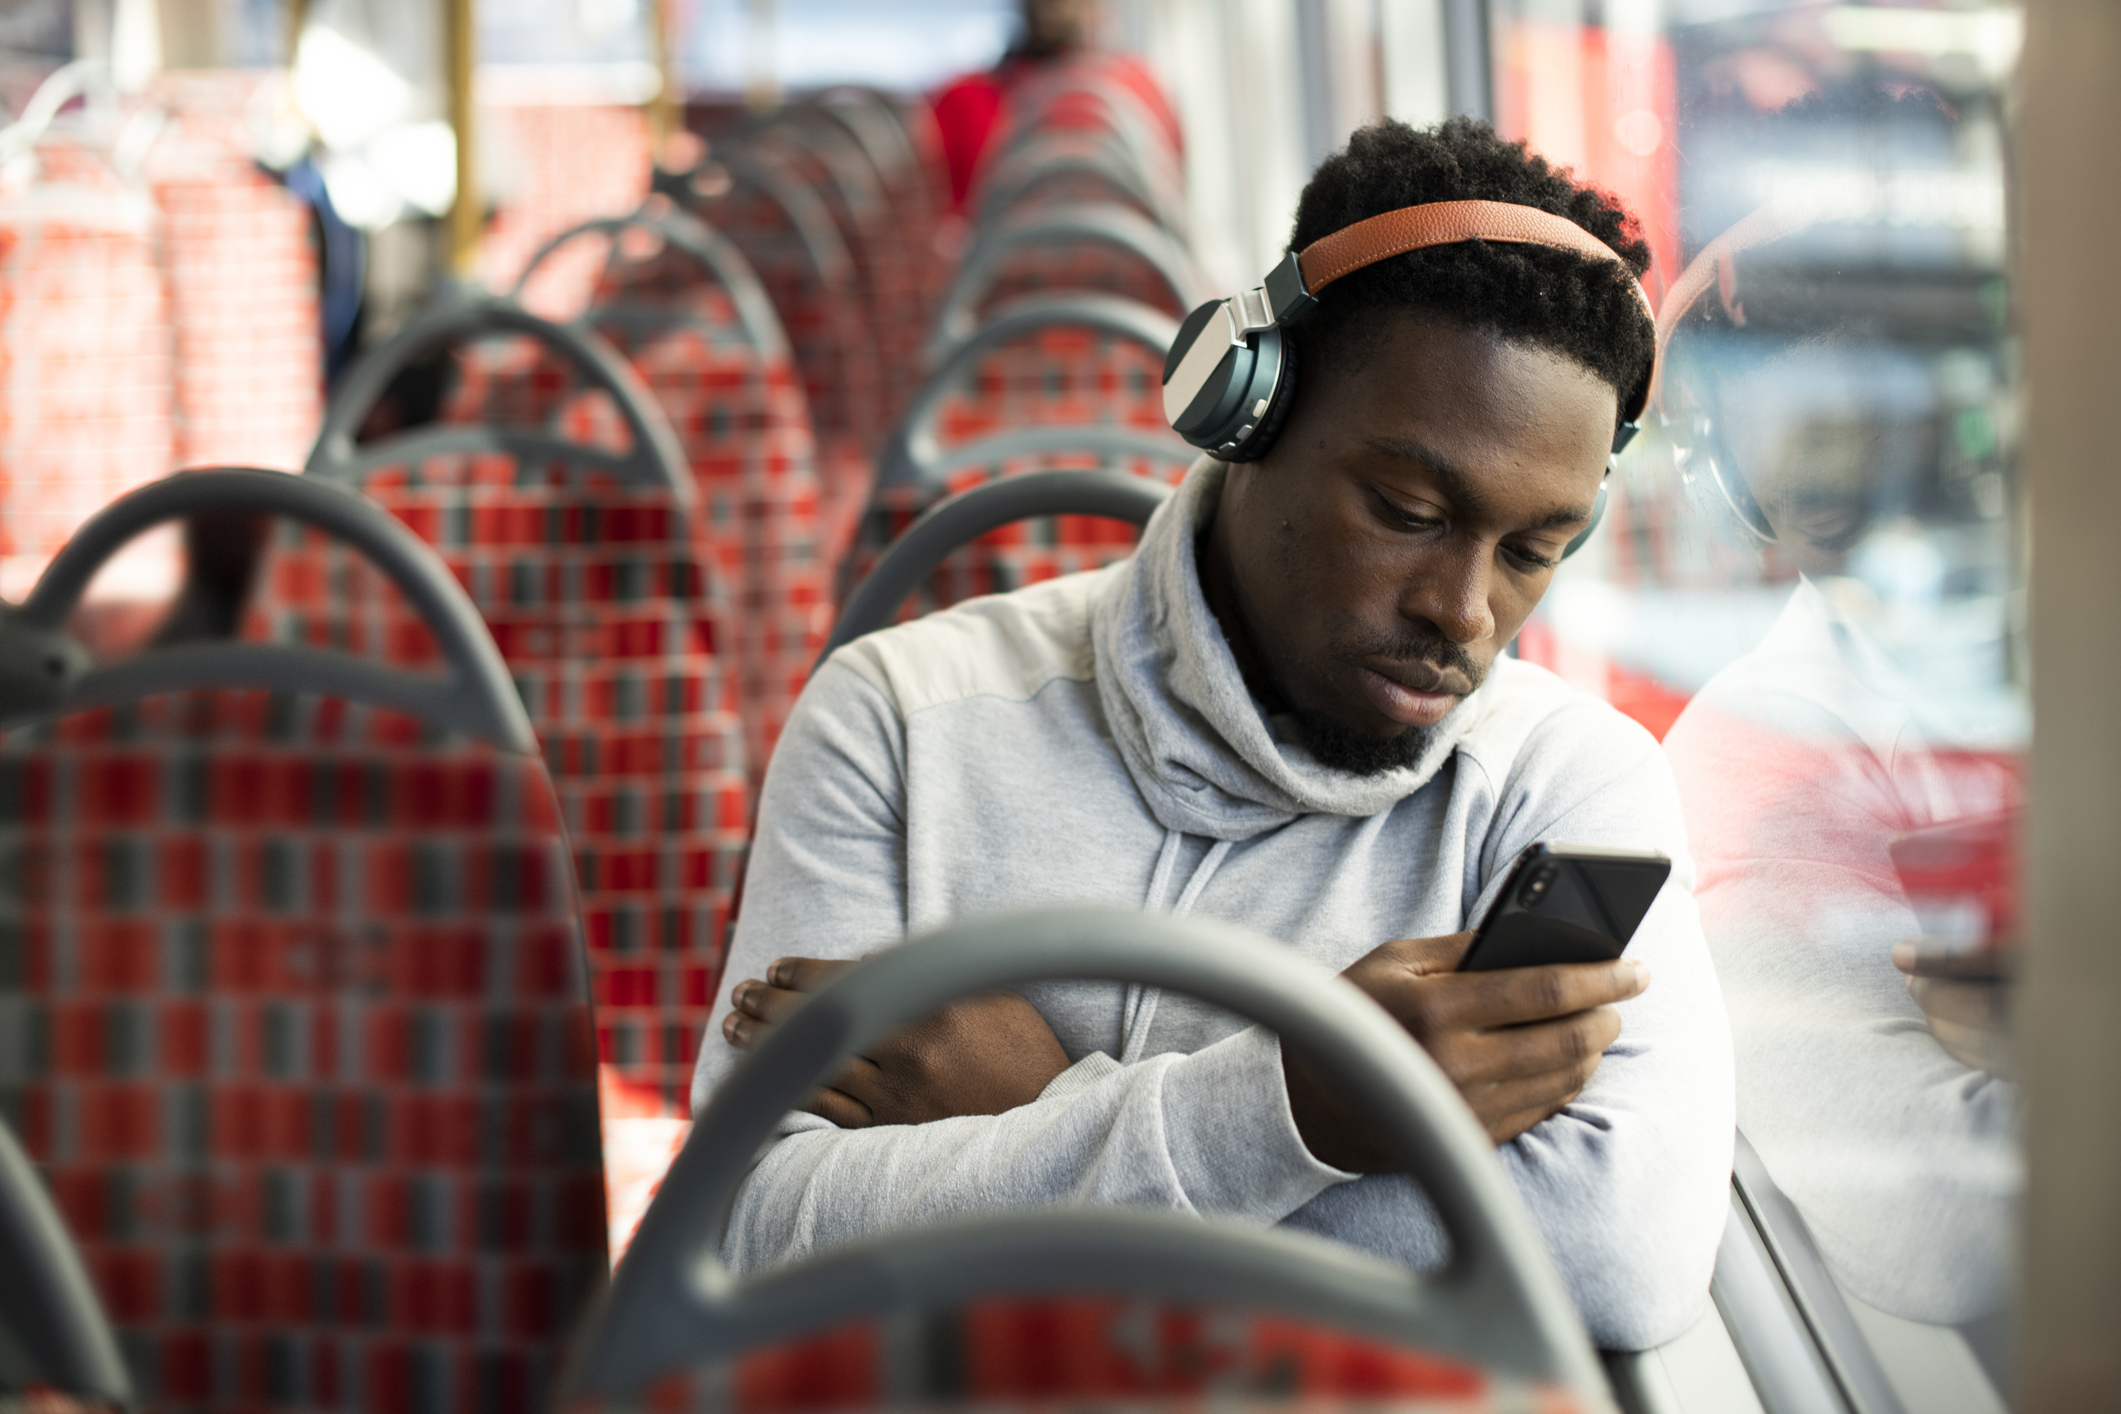 A man watching something on his phone with headphones on sitting on a bus